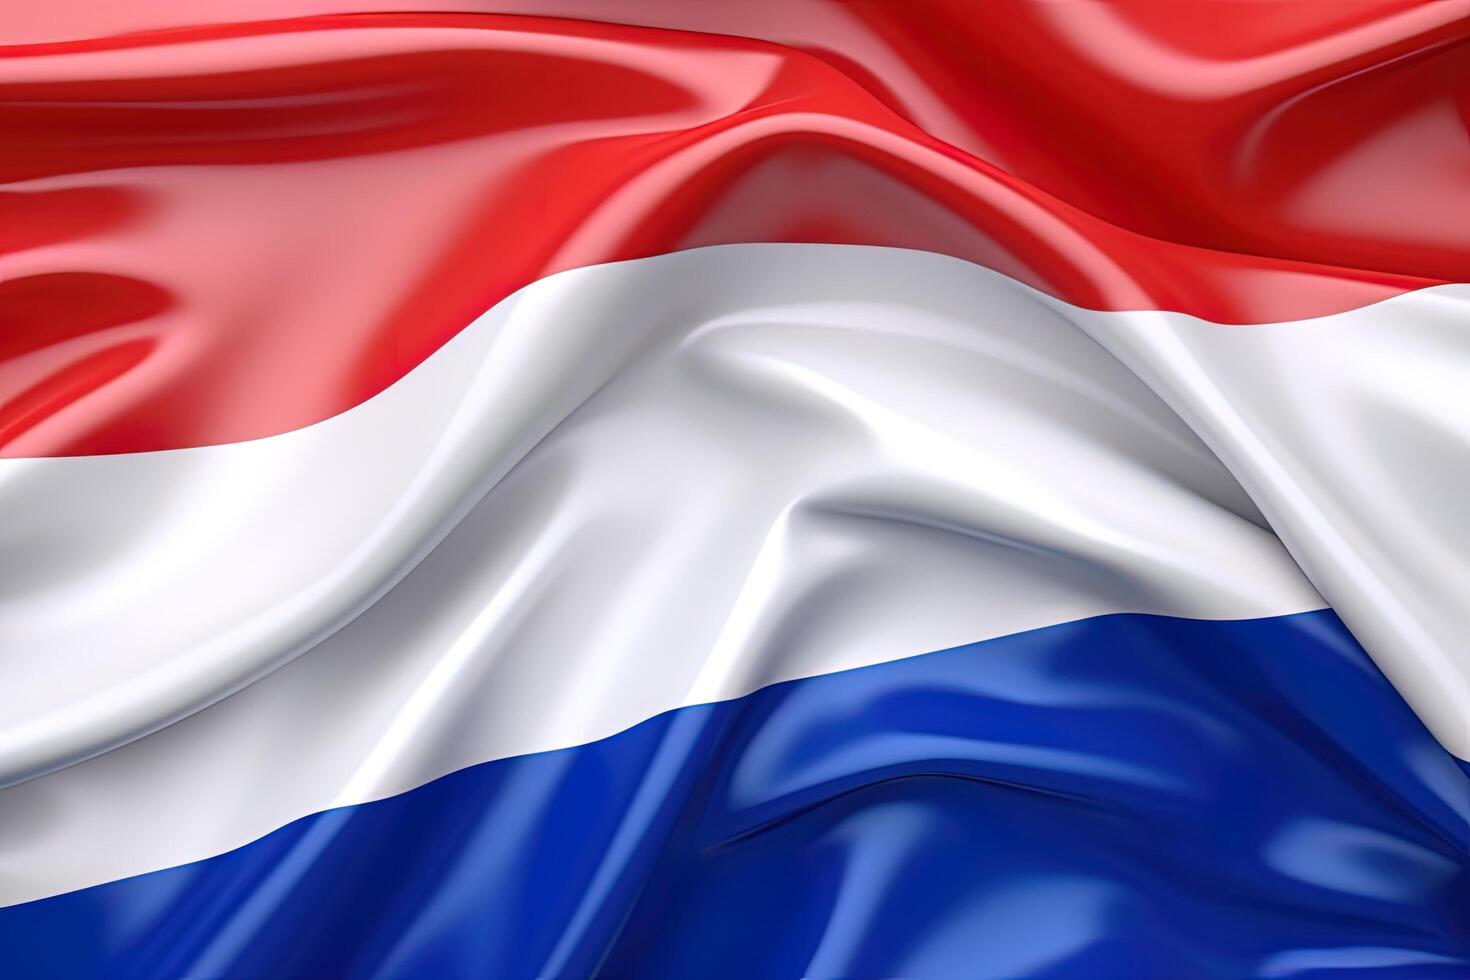 red, white and blue background, waving the national flag of Netherlands, waved a highly detailed close-up. photo